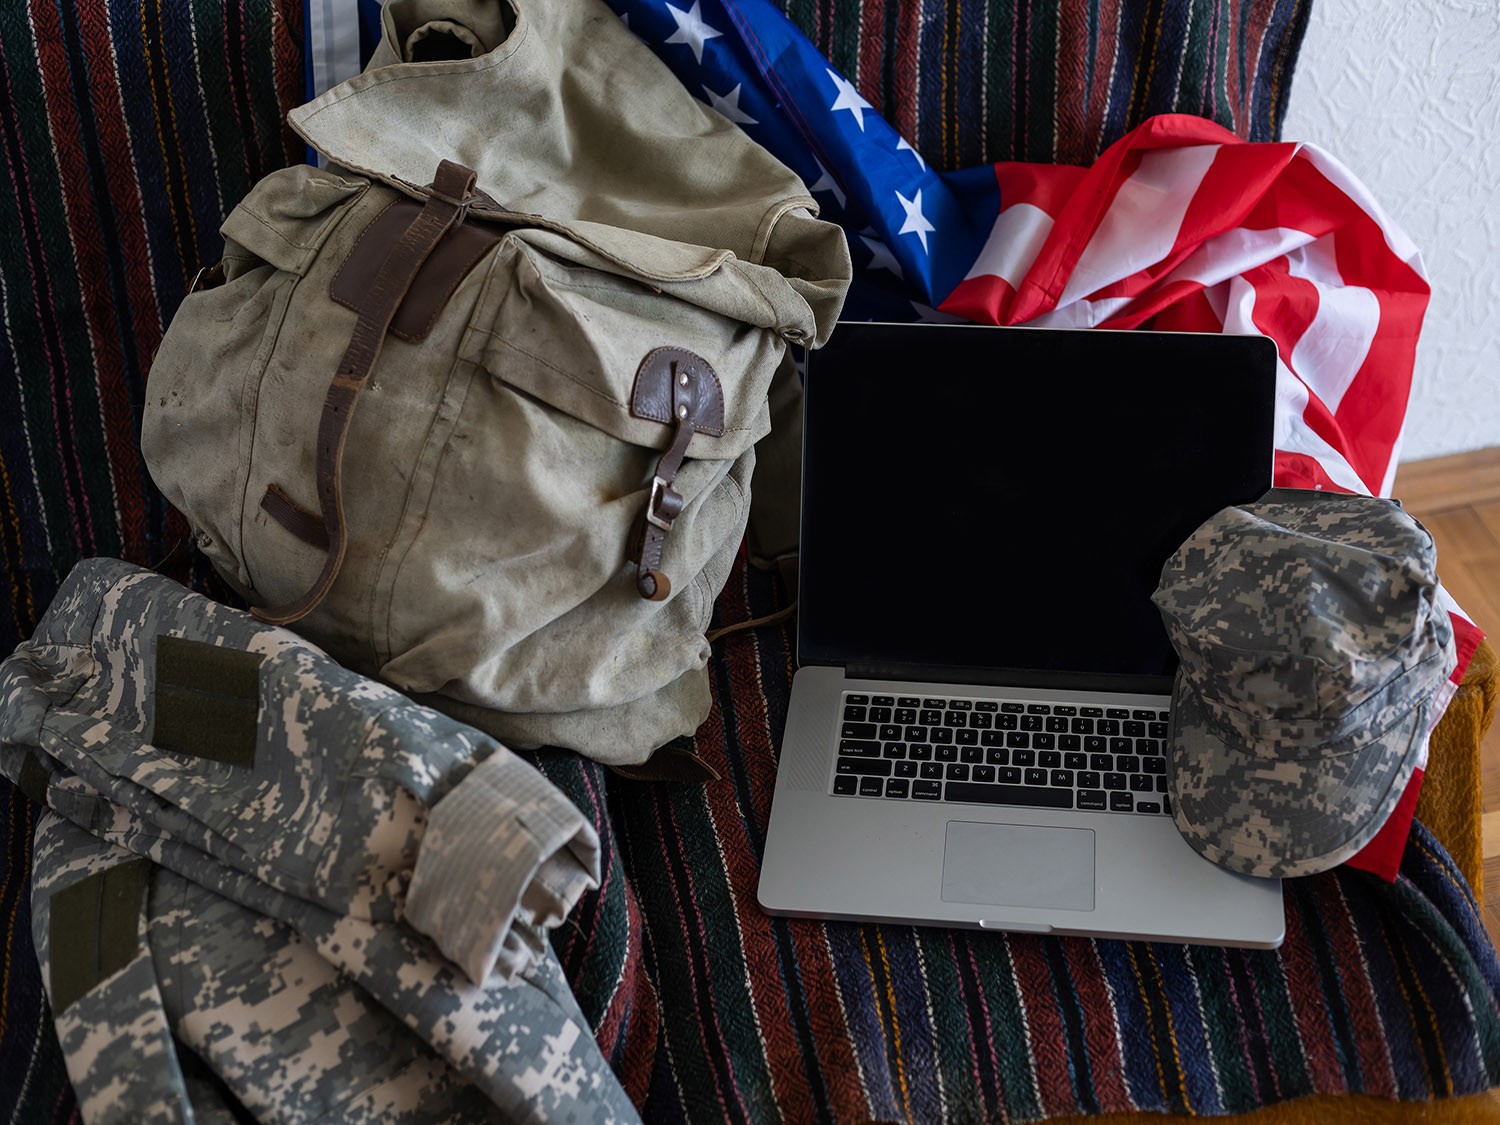 Military backpack next to laptop and American flag.